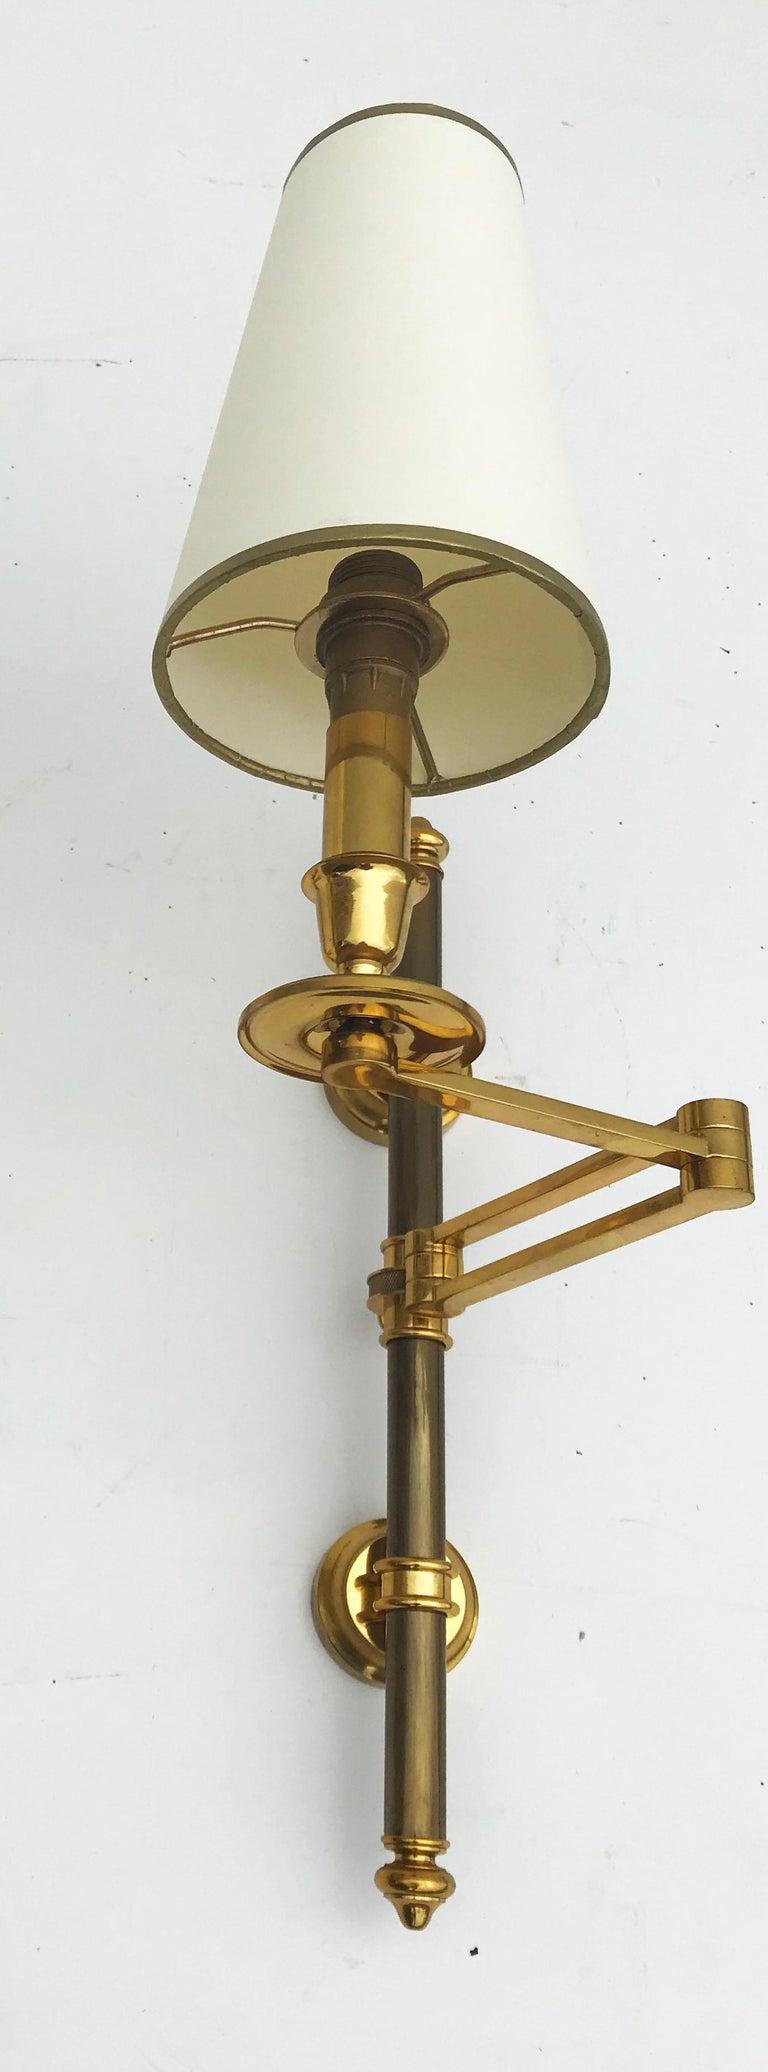 Superb pair of Maison Jansen retractable sconces,
US rewired and in working condition
Measures:
Back plate 2.3/8